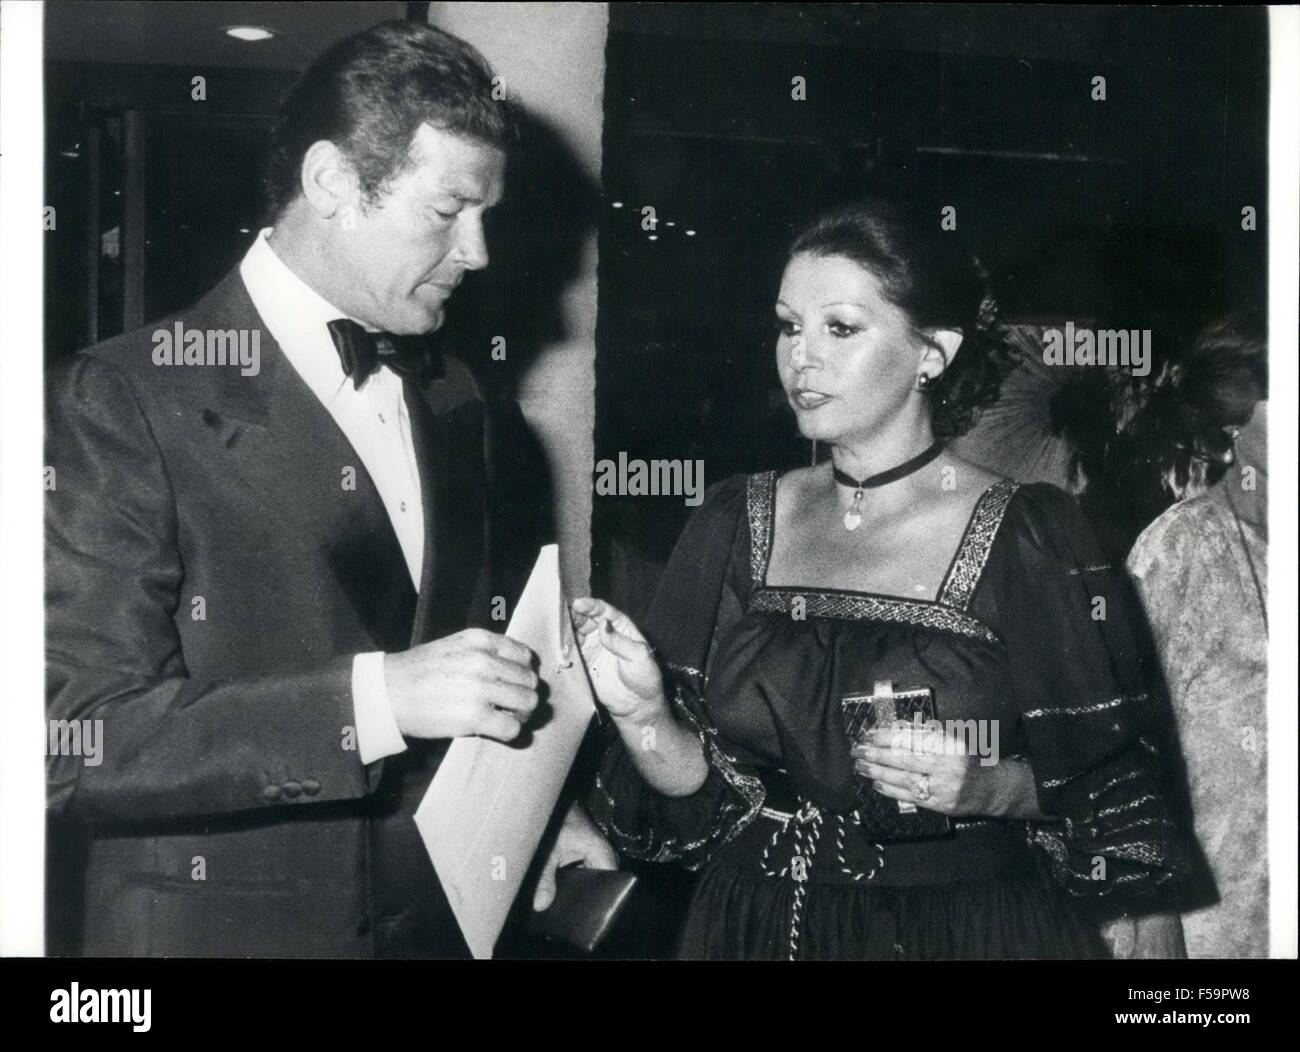 1972 - Roger Moore in Monaco: Roger Moore pictured with his wife Luisa, when they attended the 50th anniversary of the International Variety Club dinner in Monte Carlo Roger Moore is trying to prevent his former wife Dorathy Squires publishing loveletters written by him during their ten years of marriage as they might spoil his James Bond image. © Keystone Pictures USA/ZUMAPRESS.com/Alamy Live News Stock Photo